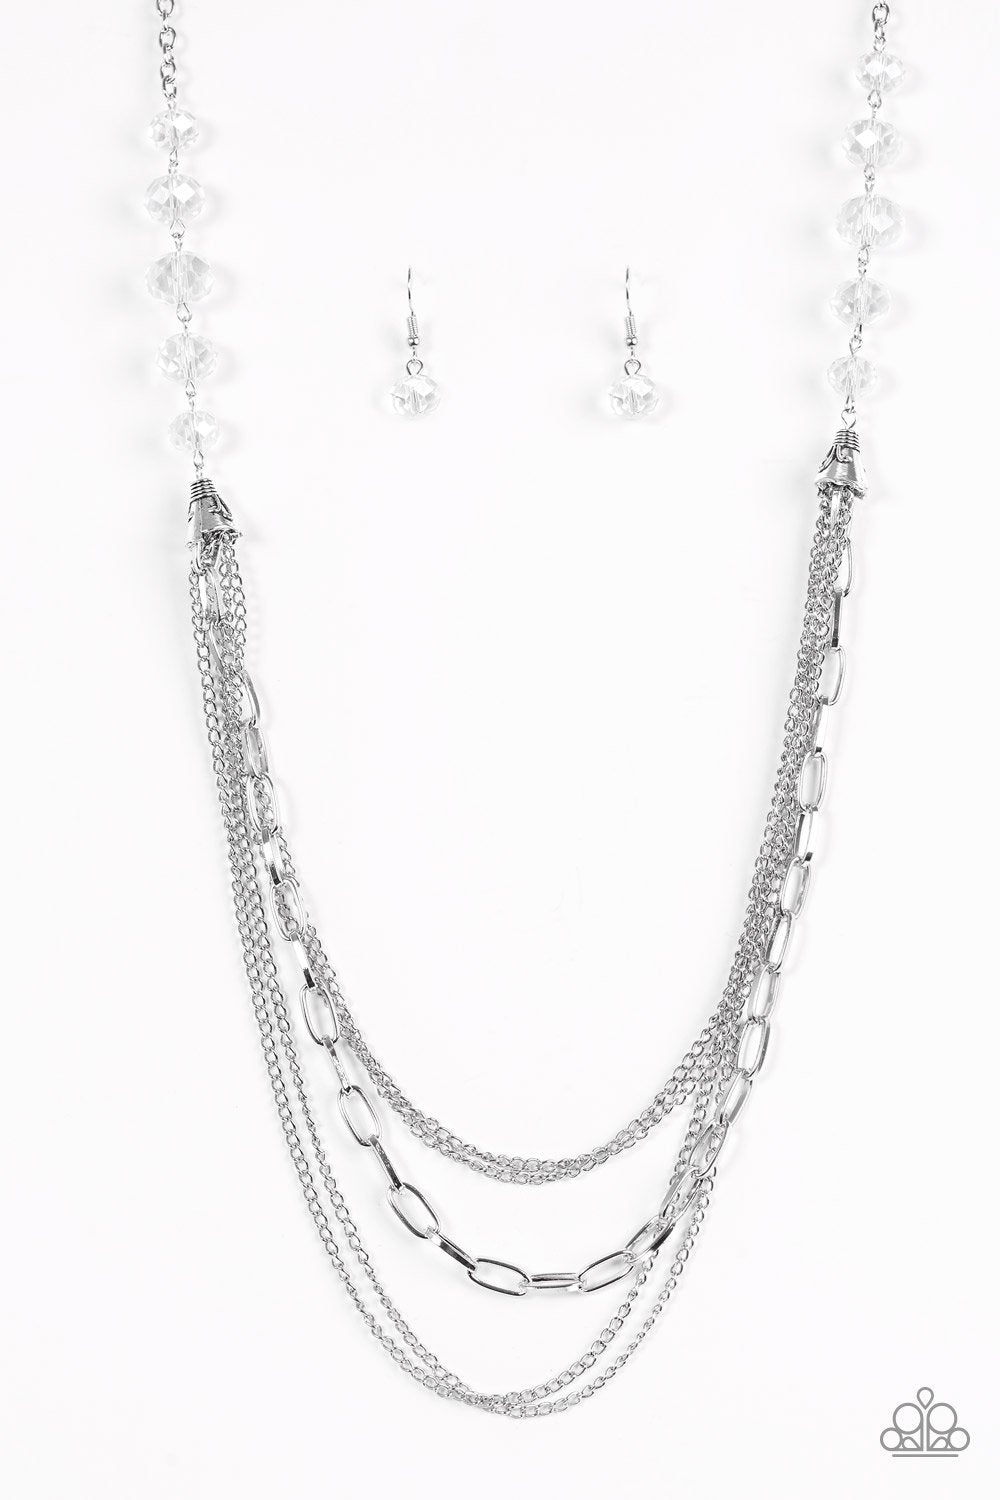 Turn It Up Town White and Silver Chain Necklace - Paparazzi Accessories-CarasShop.com - $5 Jewelry by Cara Jewels